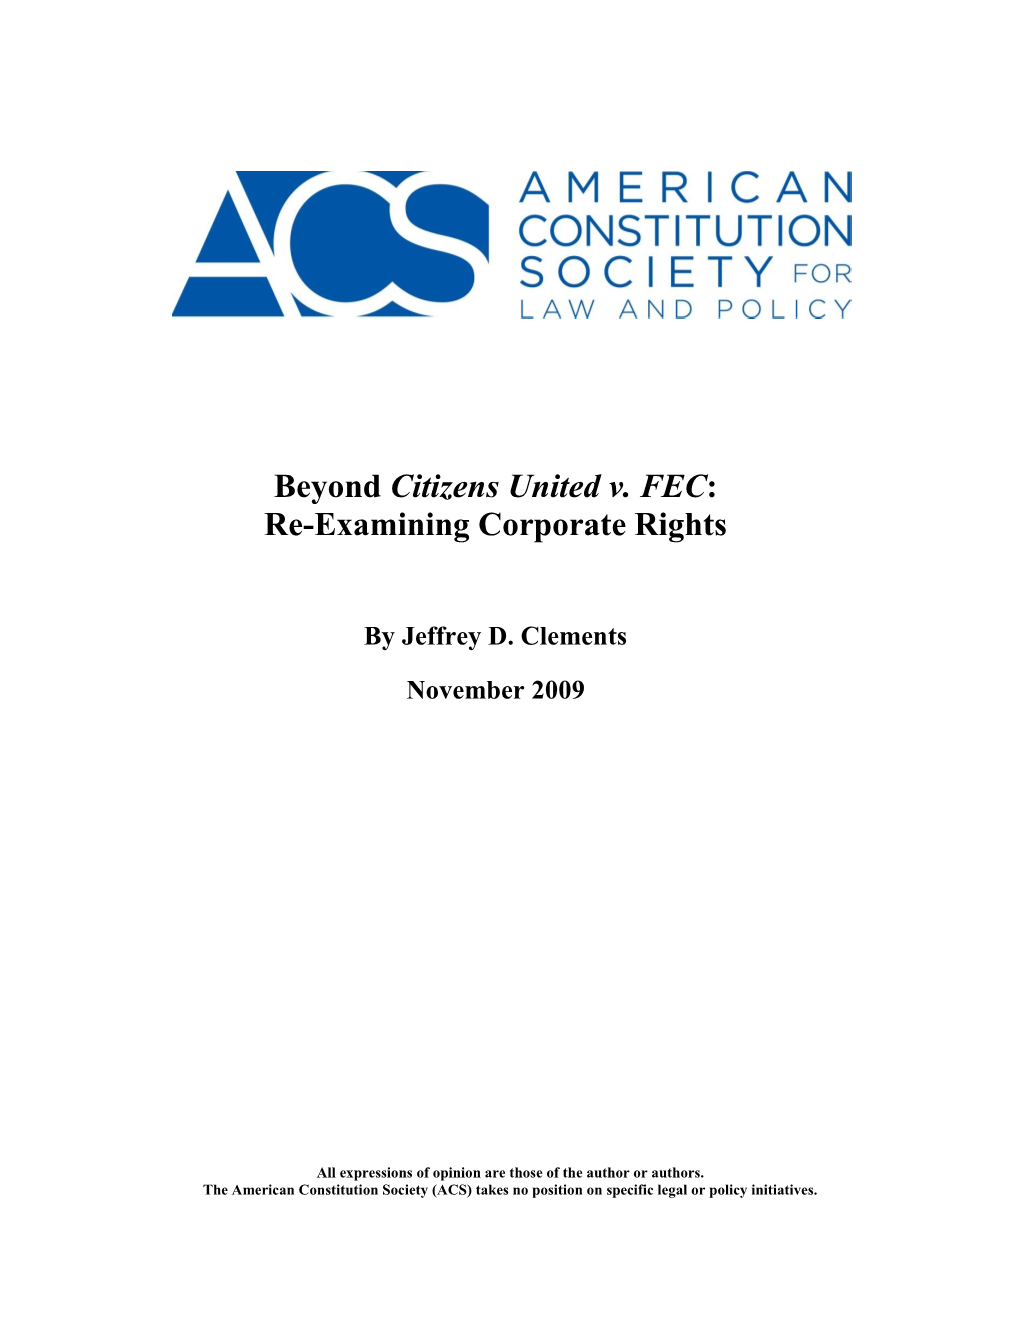 Beyond Citizens United V. FEC: Re-Examining Corporate Rights